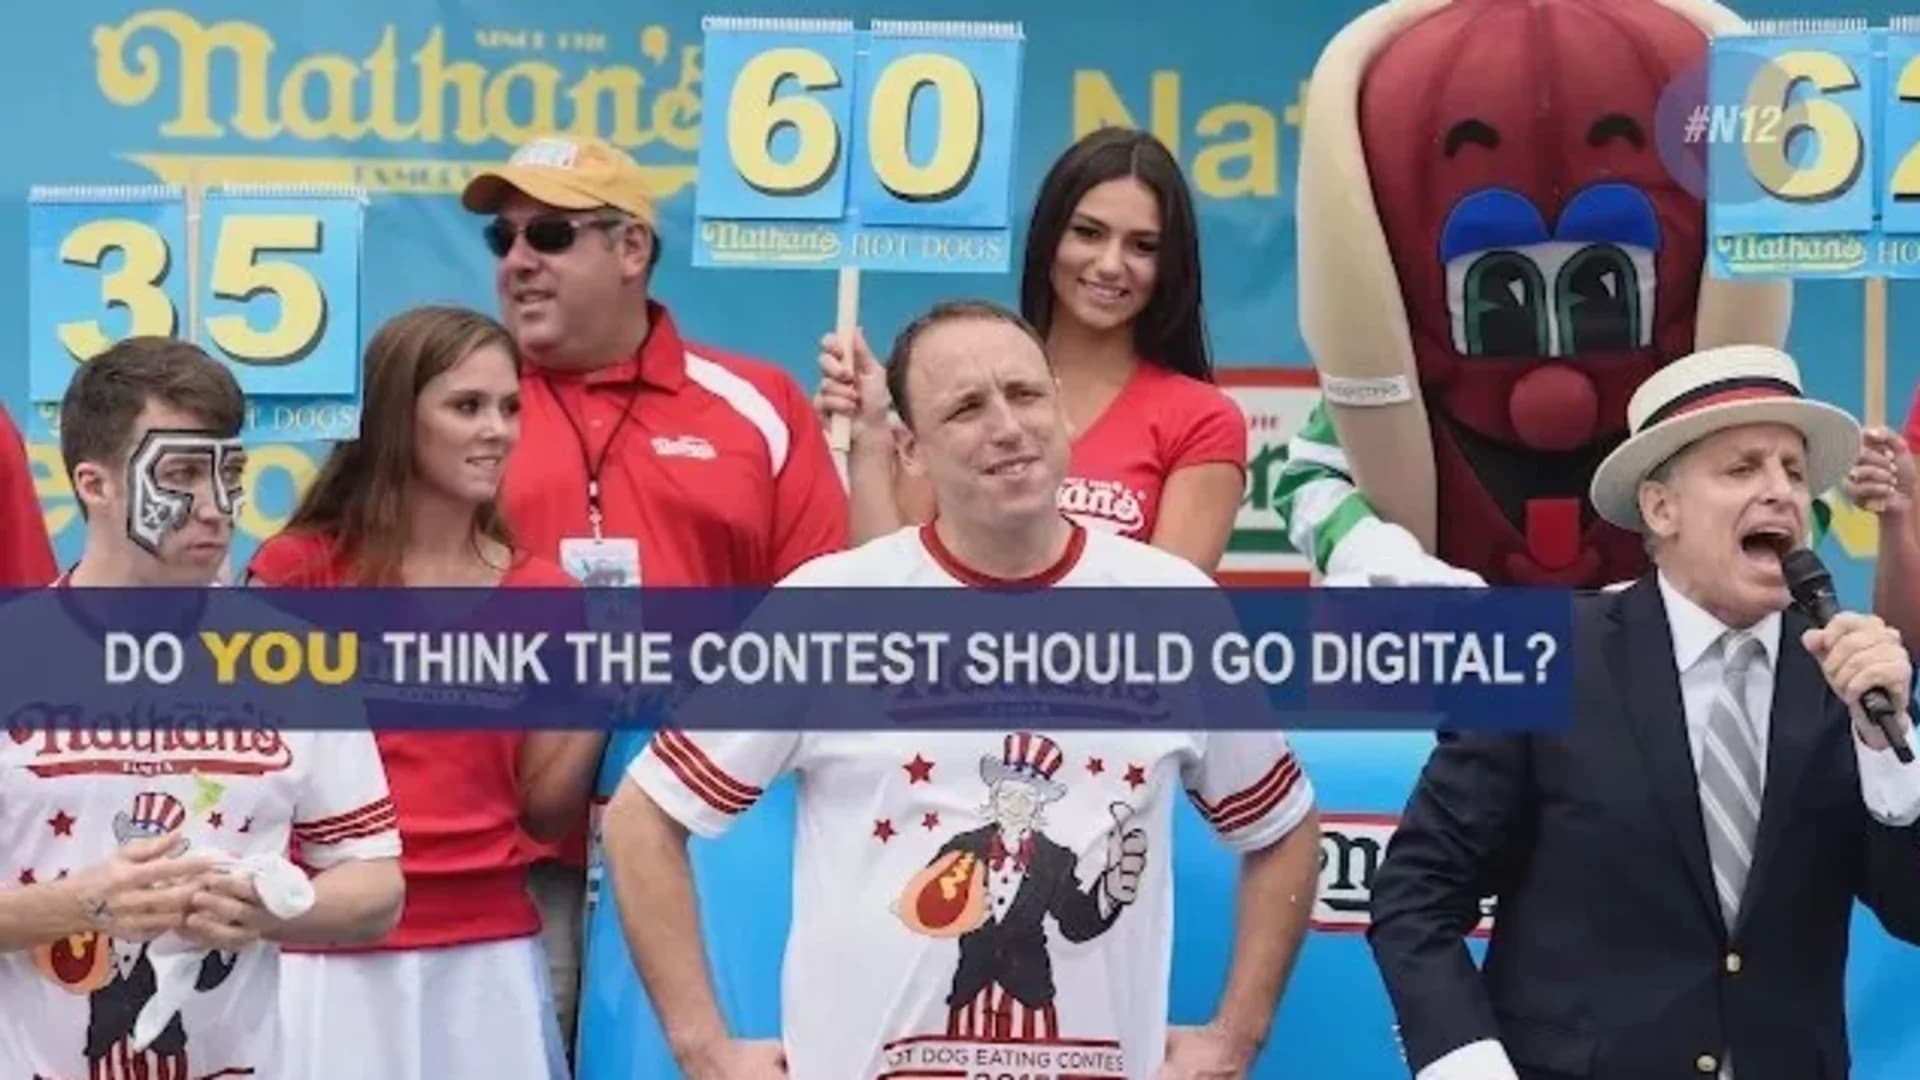 #N12BX: Nathan's Famous Hot Dog Eating Contest flub